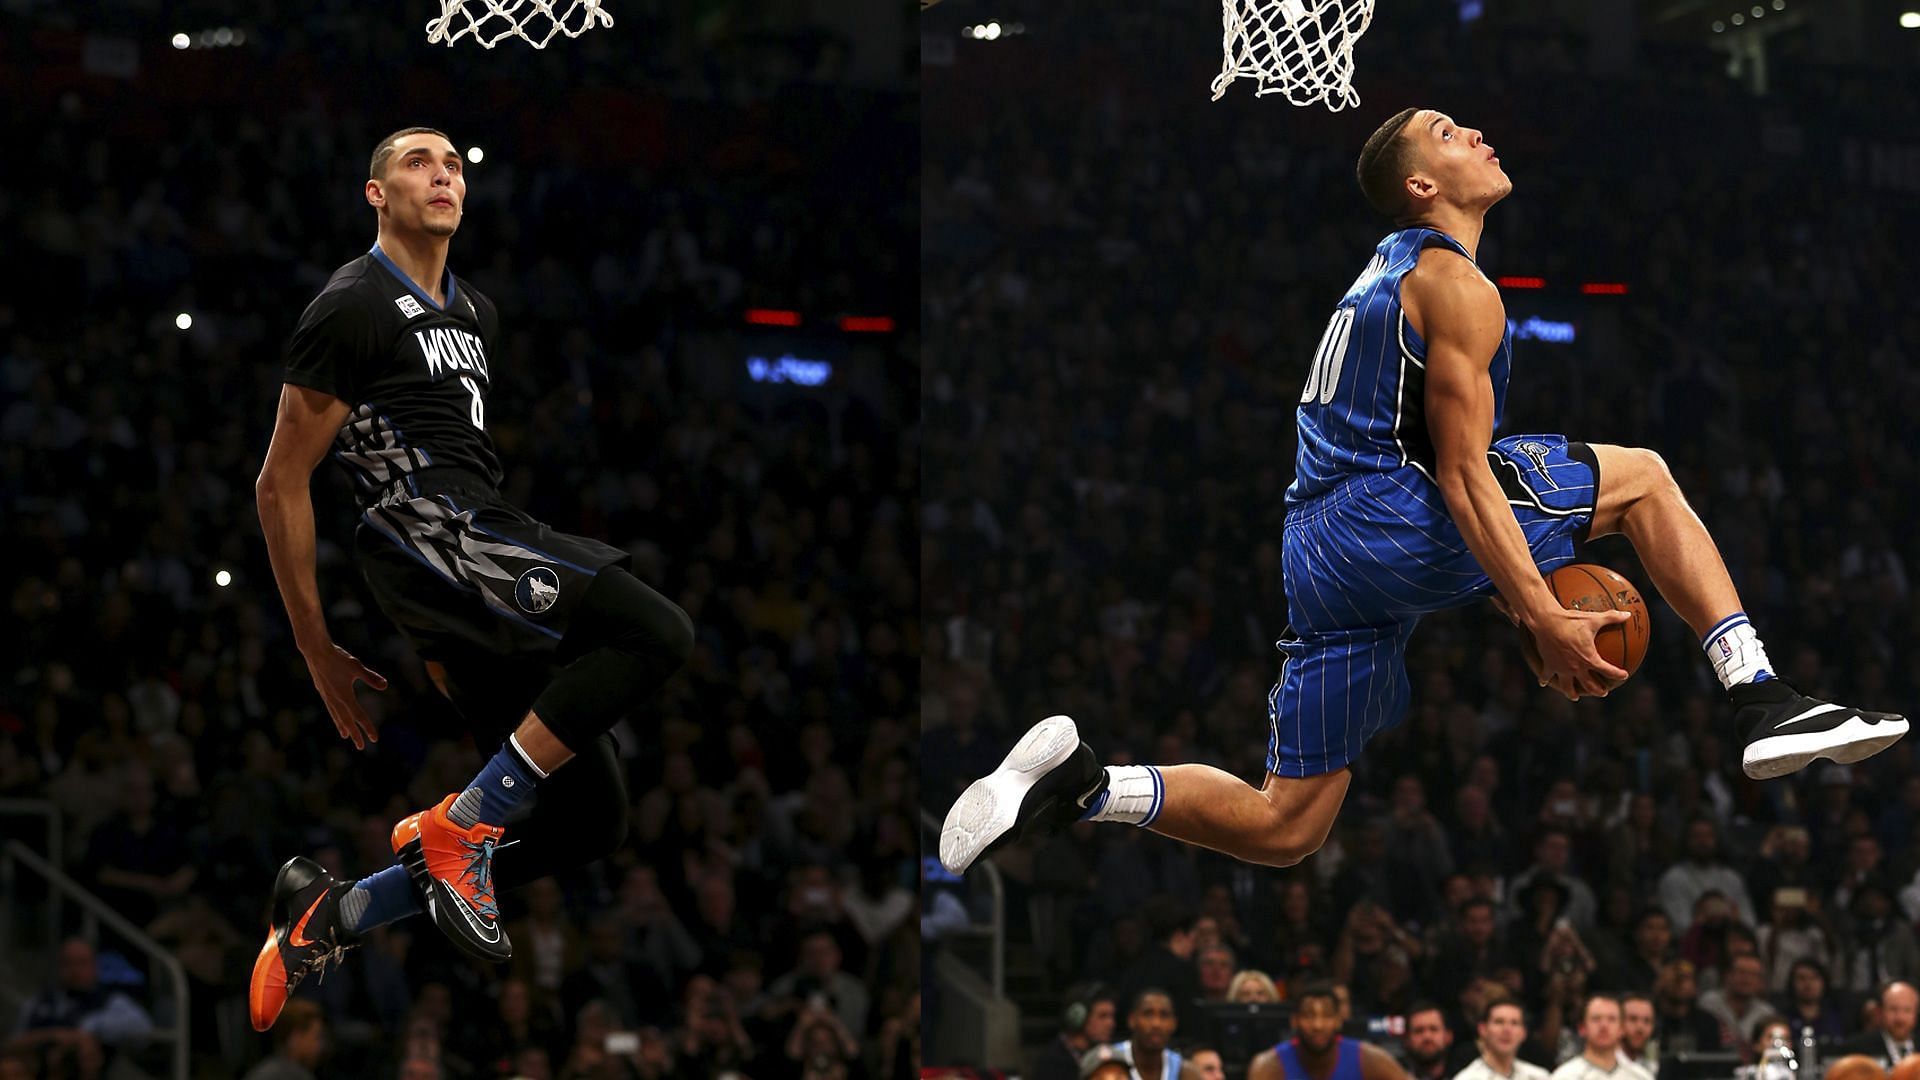 Zach LaVine and Aaron Gordon brought the house down with one electric dunk after another in the controversial 2016 Dunk Contest. [Photo: Sporting News]